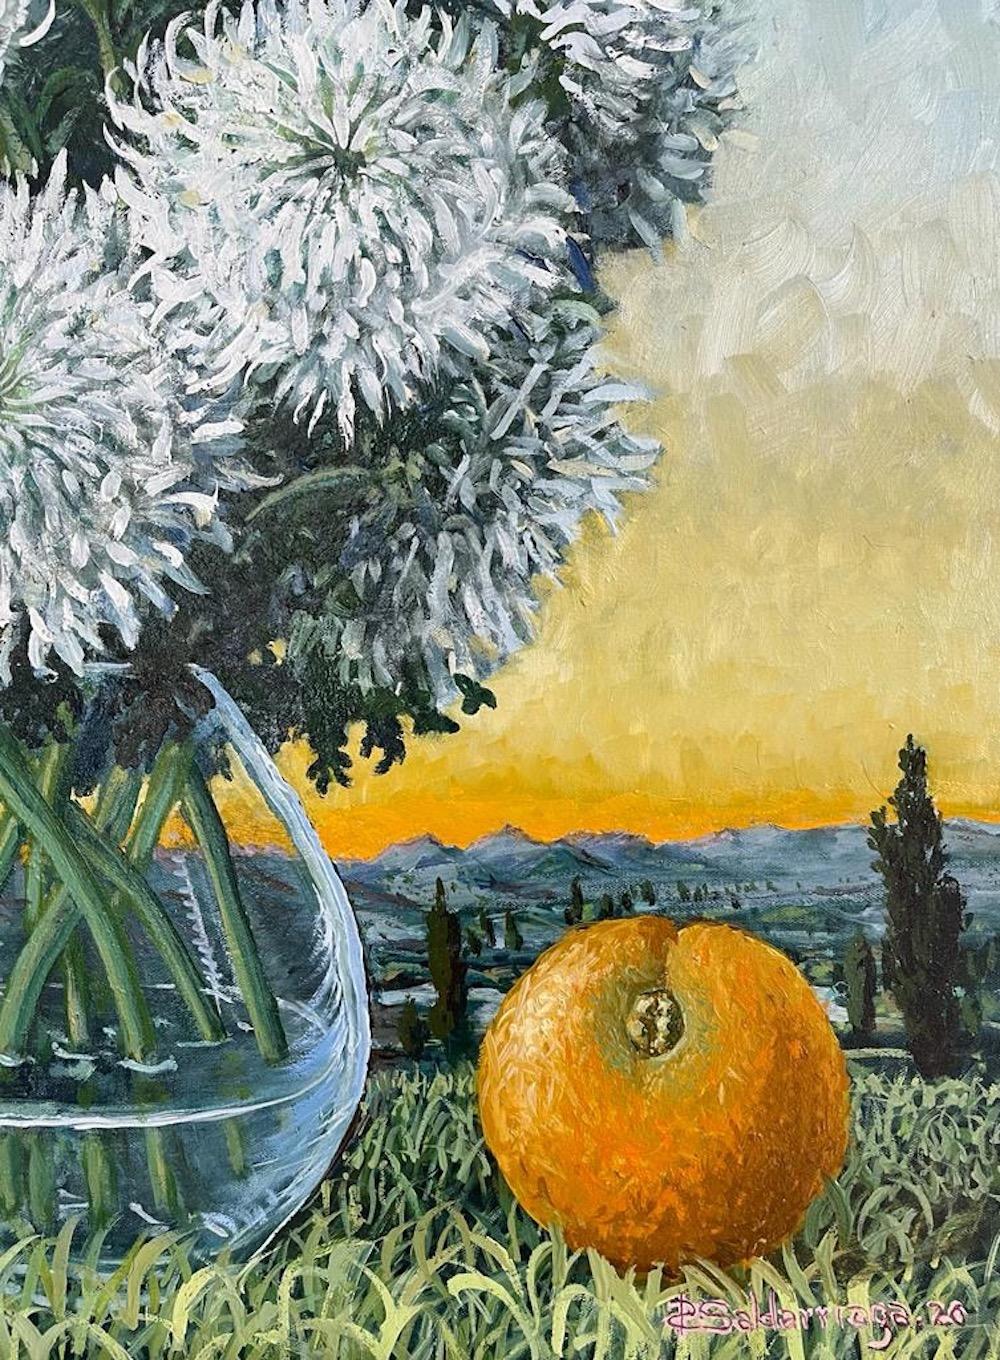 White Chrysanthemums And Oranges - Contemporary Painting by Rafael Saldarriaga